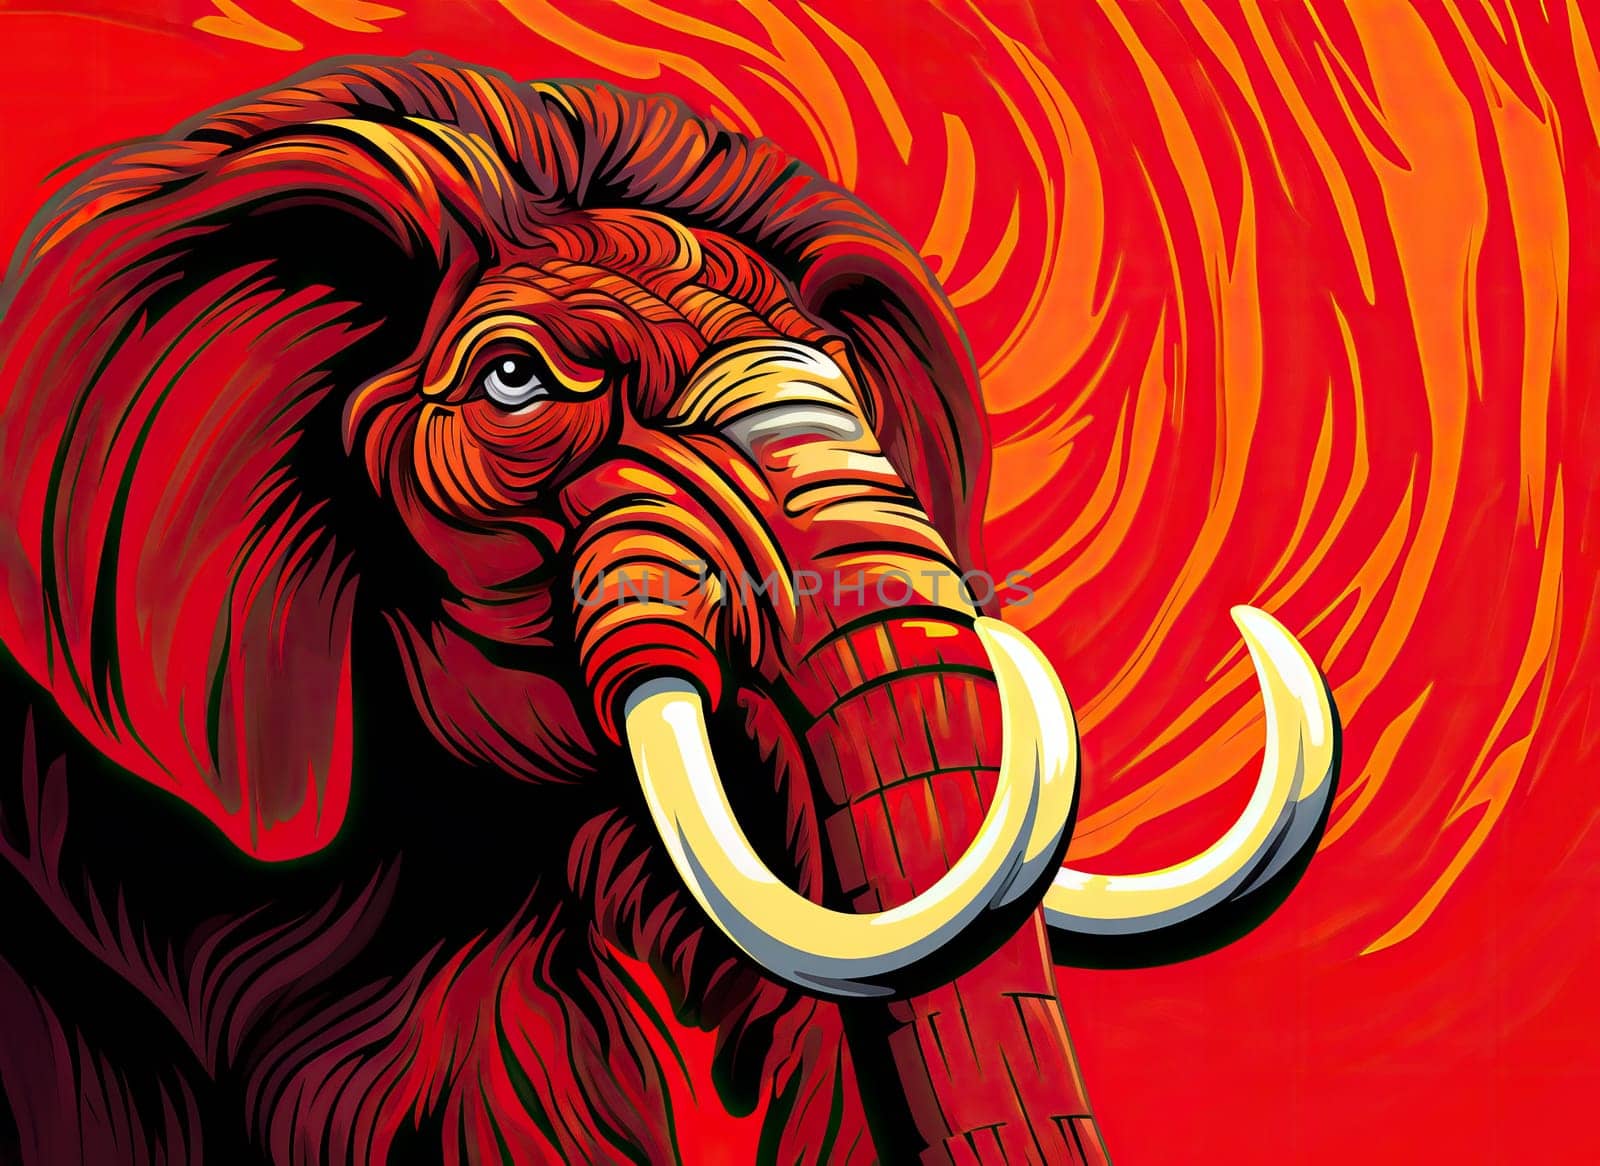 Mammoth. Abstract portrait of a fairy tale mystical animal in psychedelic pop art style. Isolated on a red background. Template for t-shirt print, sticker, poster, etc.